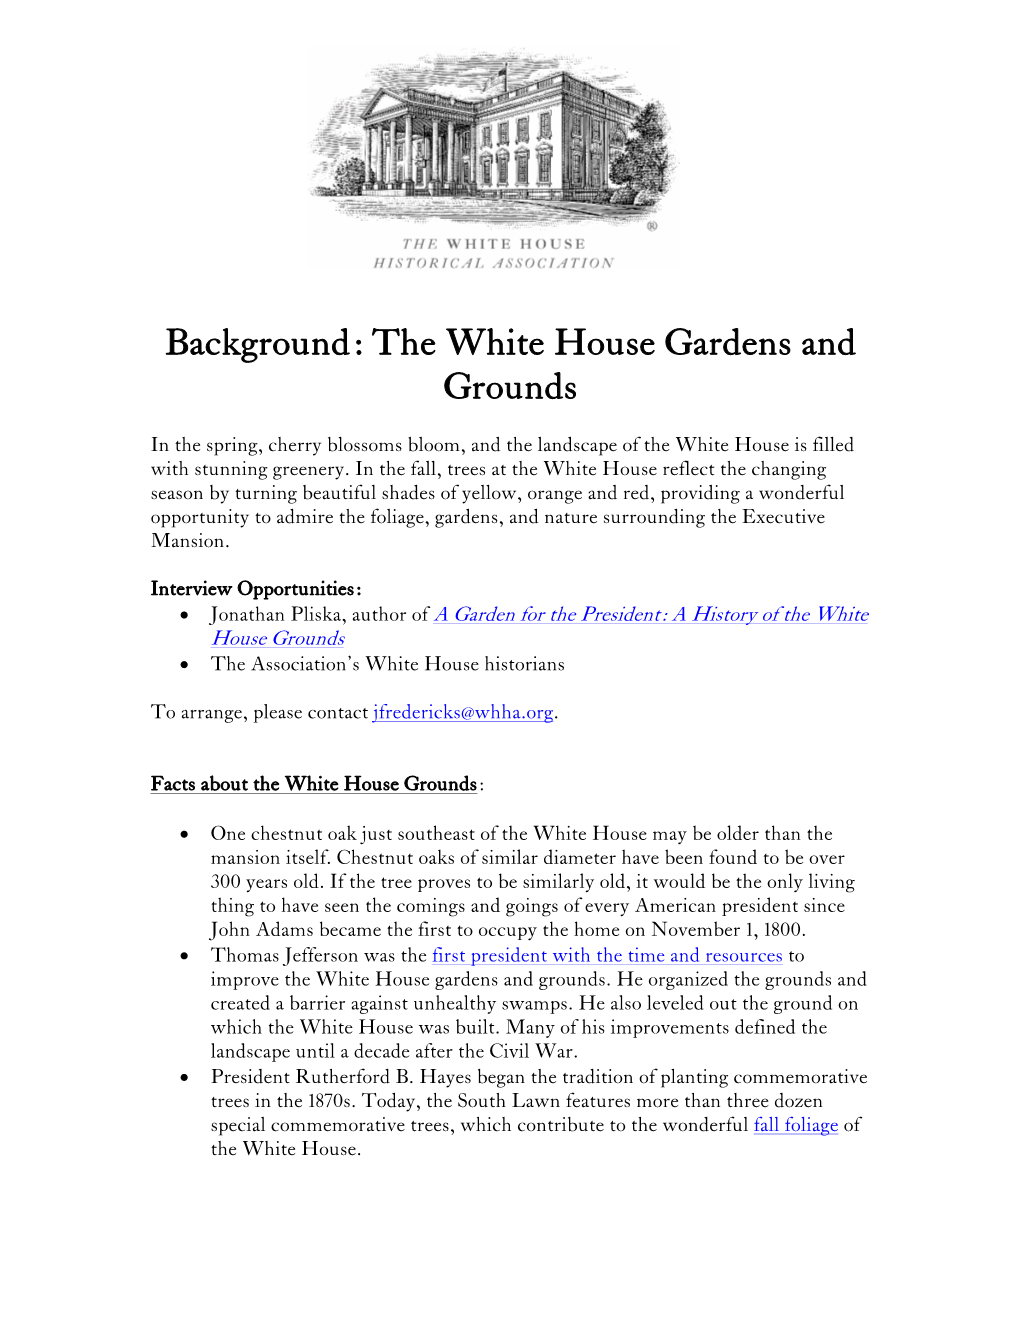 Background: the White House Gardens and Grounds